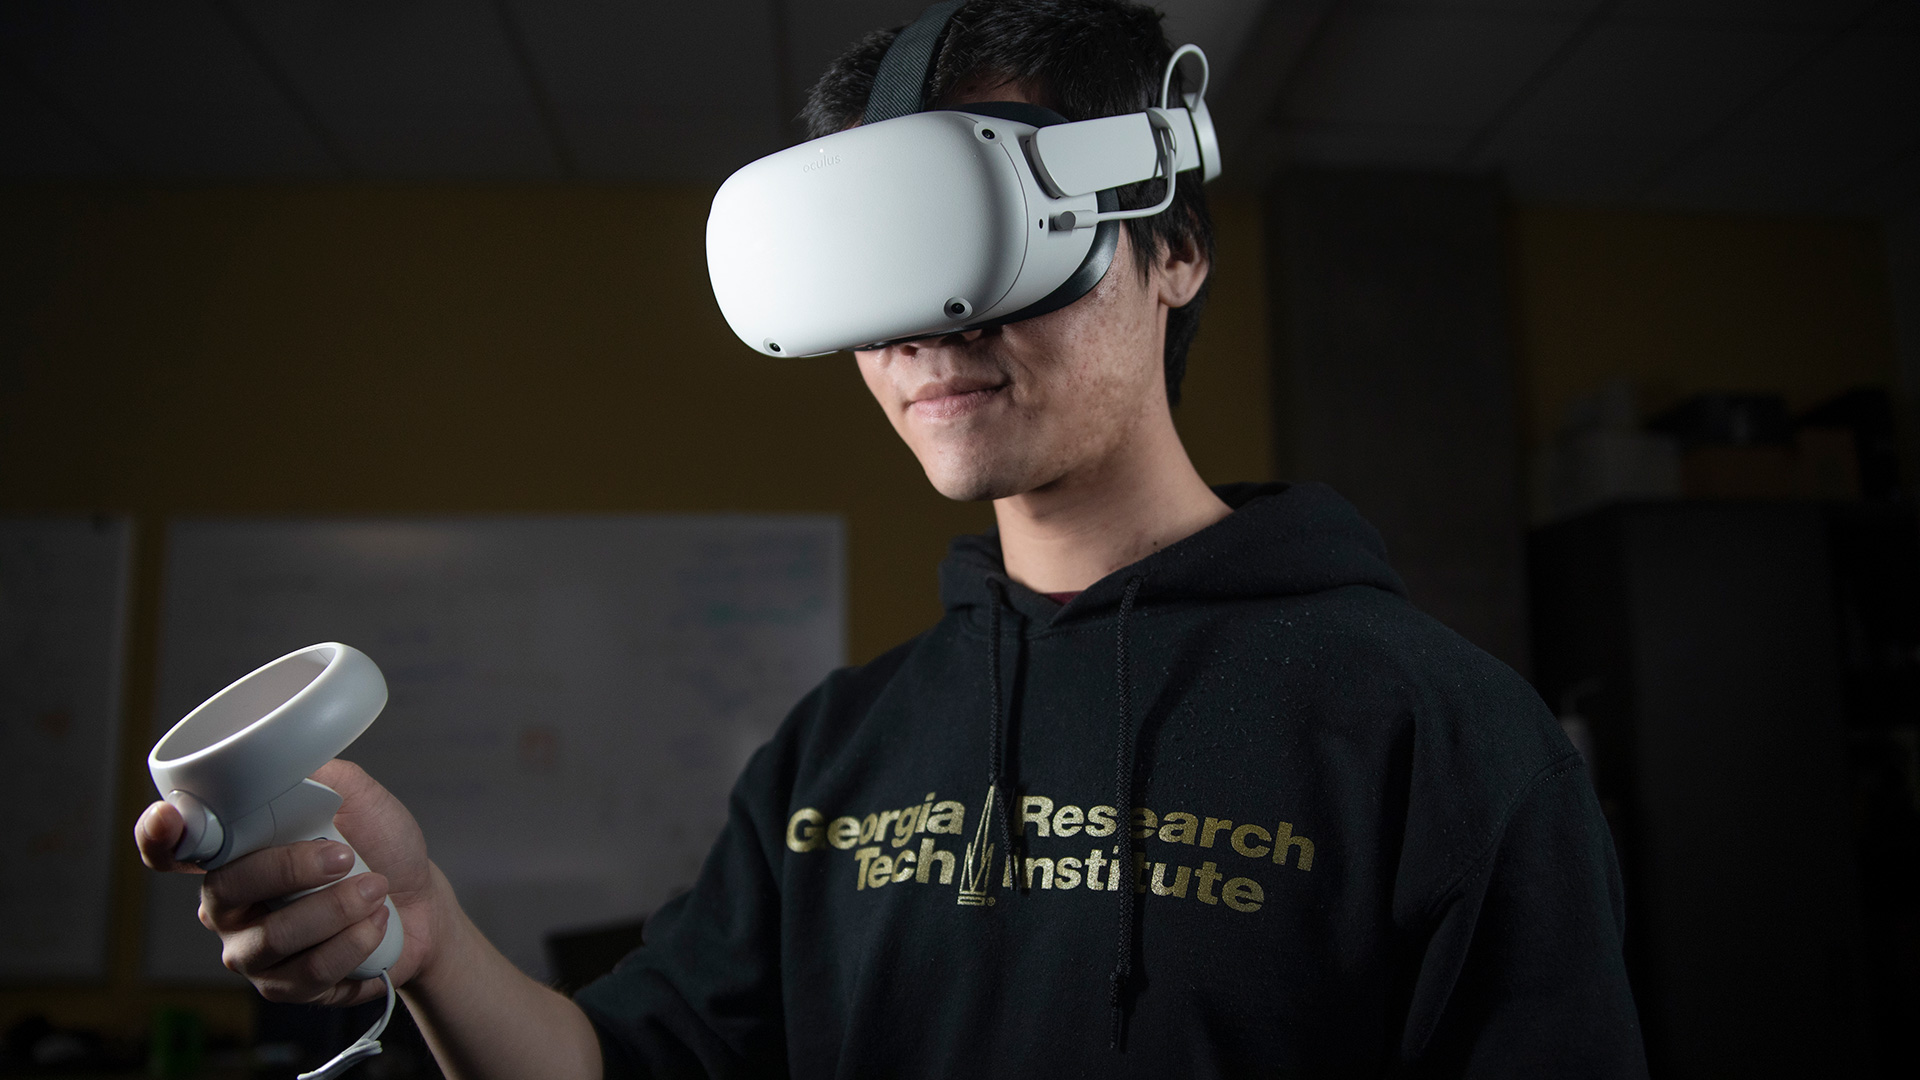 Researcher wearing VR goggles and holding VR wand.